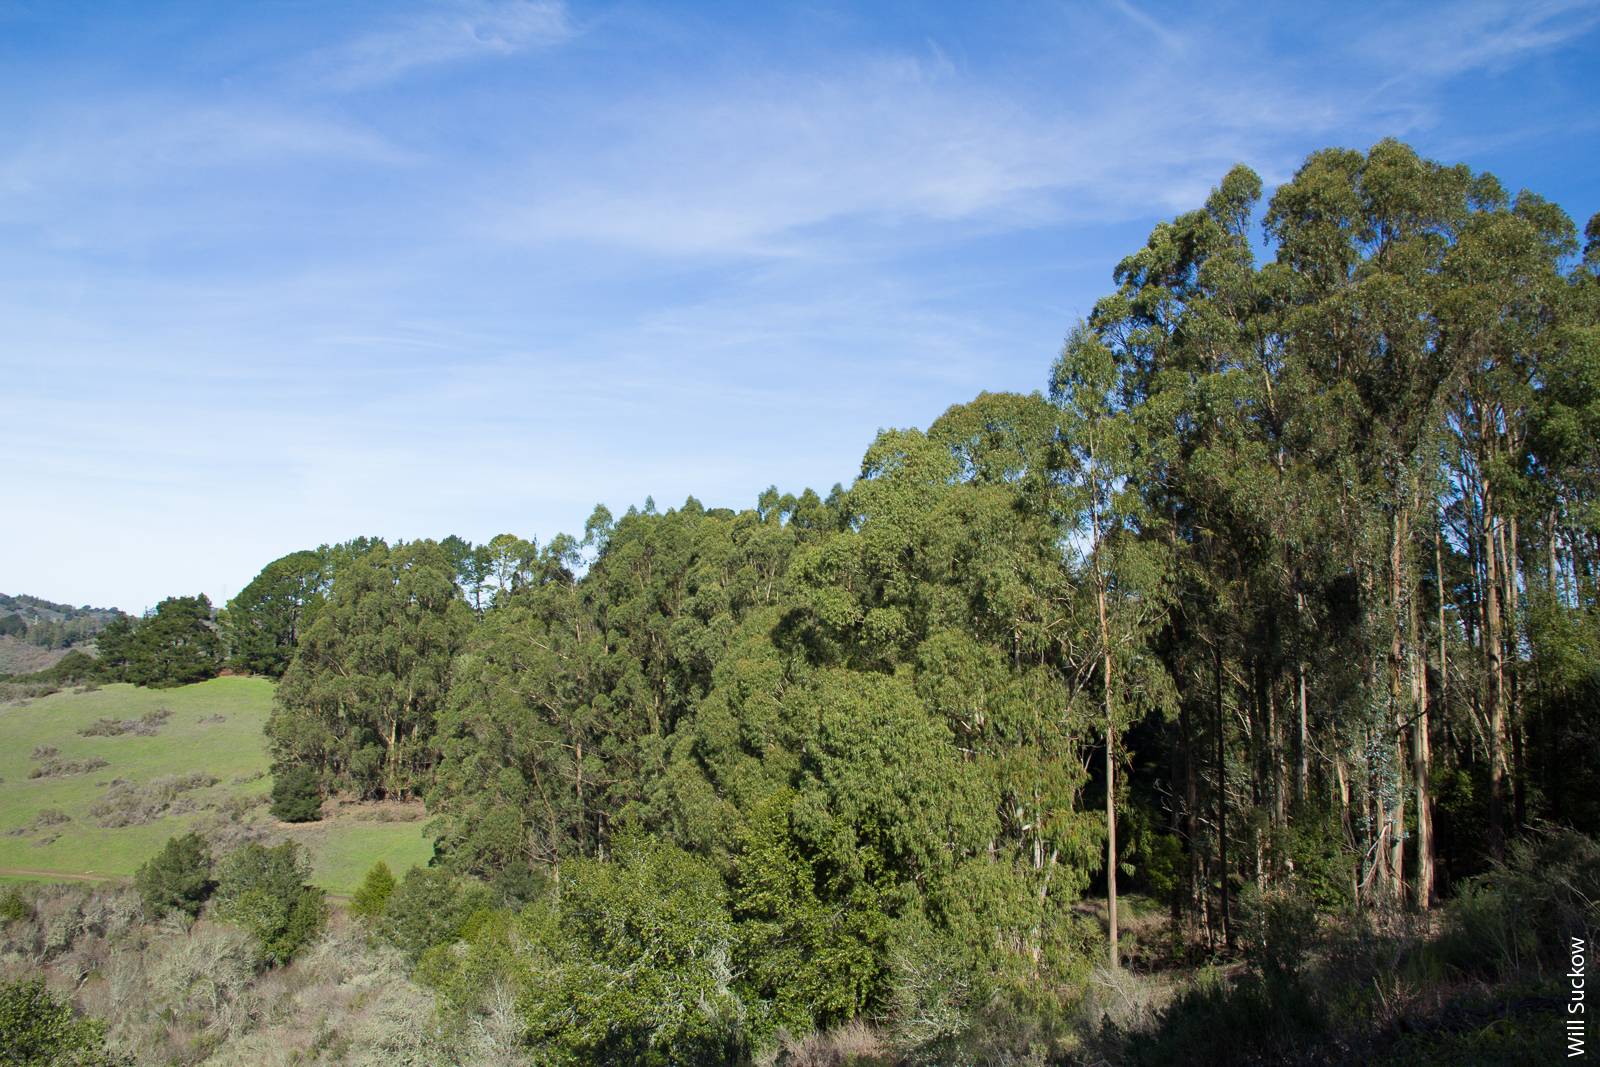 Naturalized blue gum trees in Tilden Regional Park, Contra Costa County.